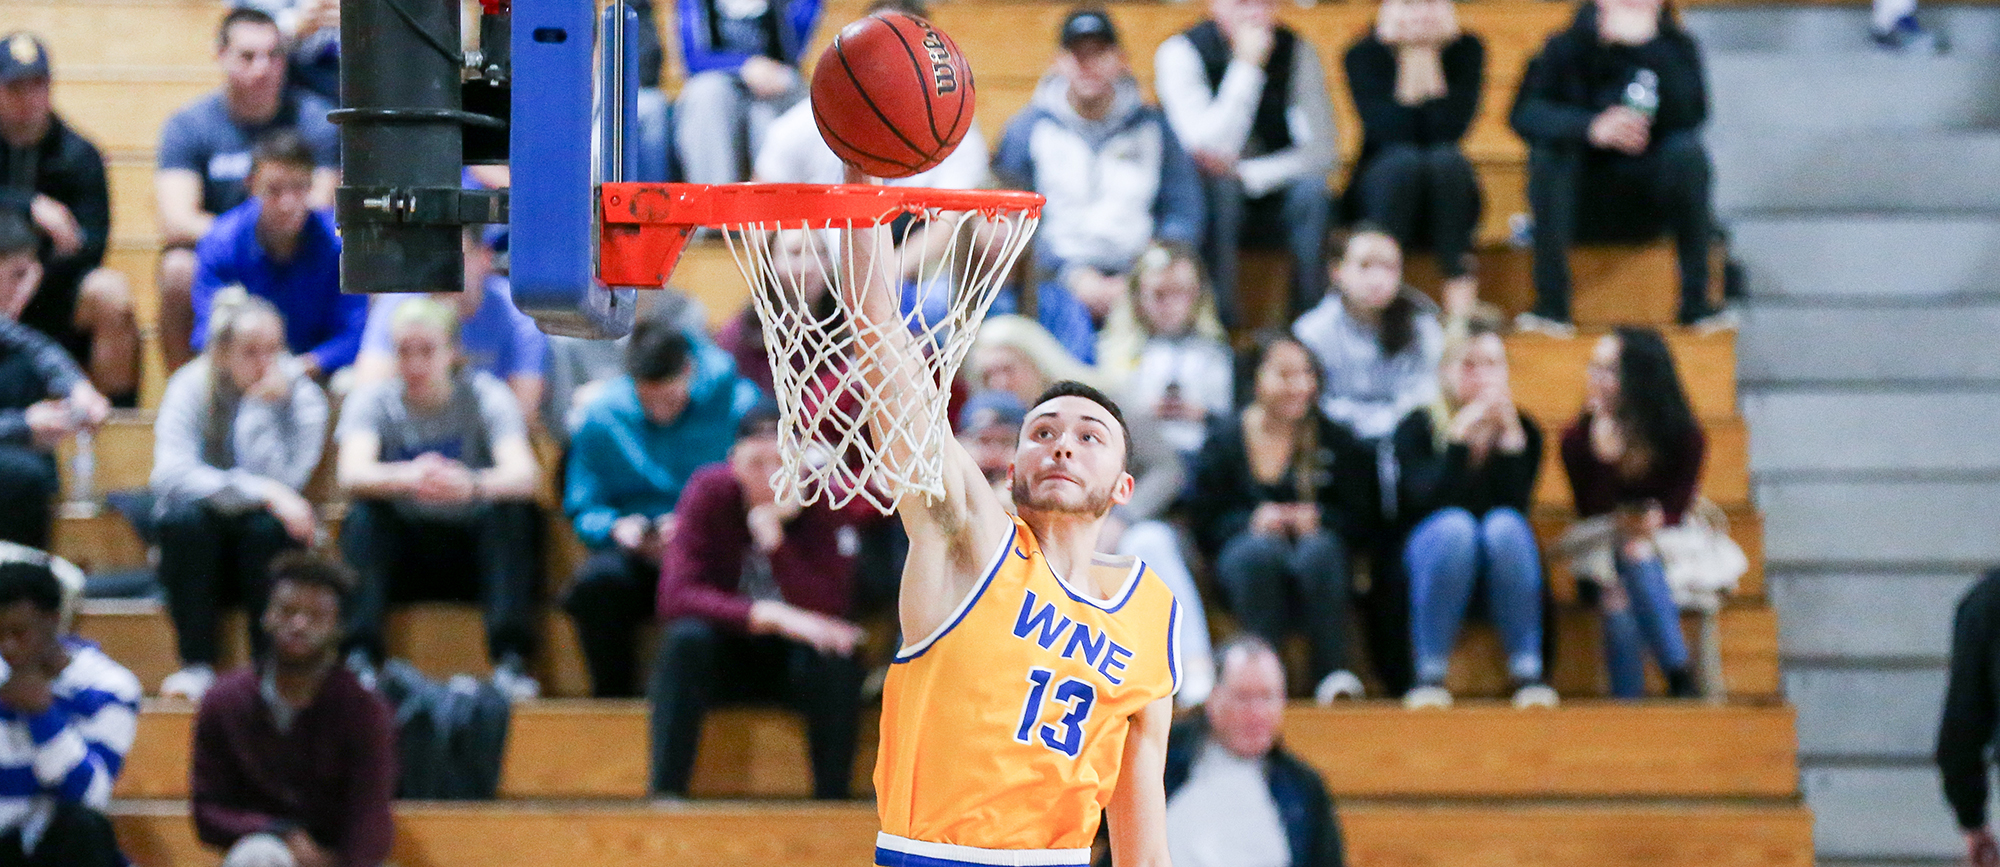 Freshman Alex Sikorski broke out for a season-high 24 points on 10-of-15 shooting in Western New England's wire-to-wire victory over Eastern Nazarene on Saturday. (Photo by Chris Marion)